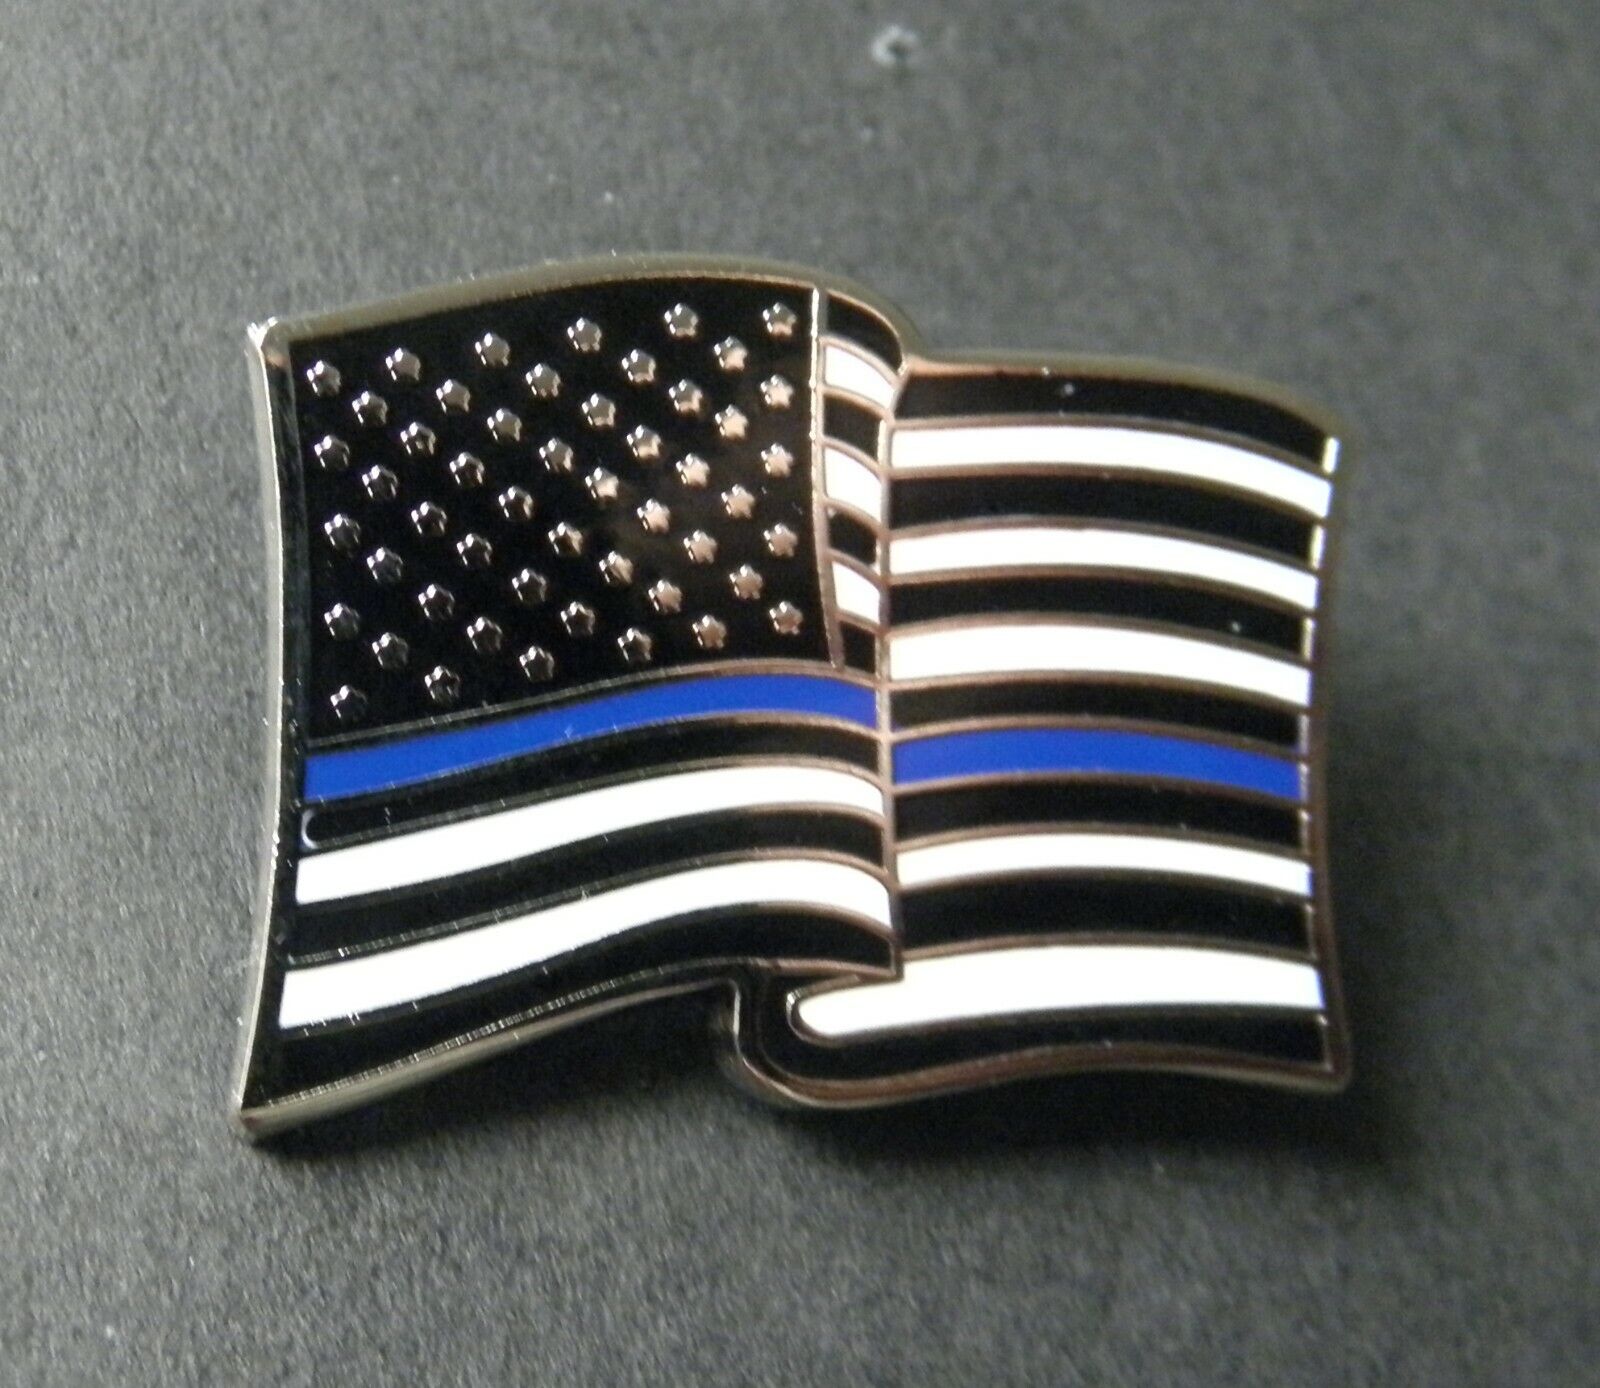 POLICE HONOR THIN BLUE LINE USA FLAG LAPEL PIN BADGE 1.25 INCHES